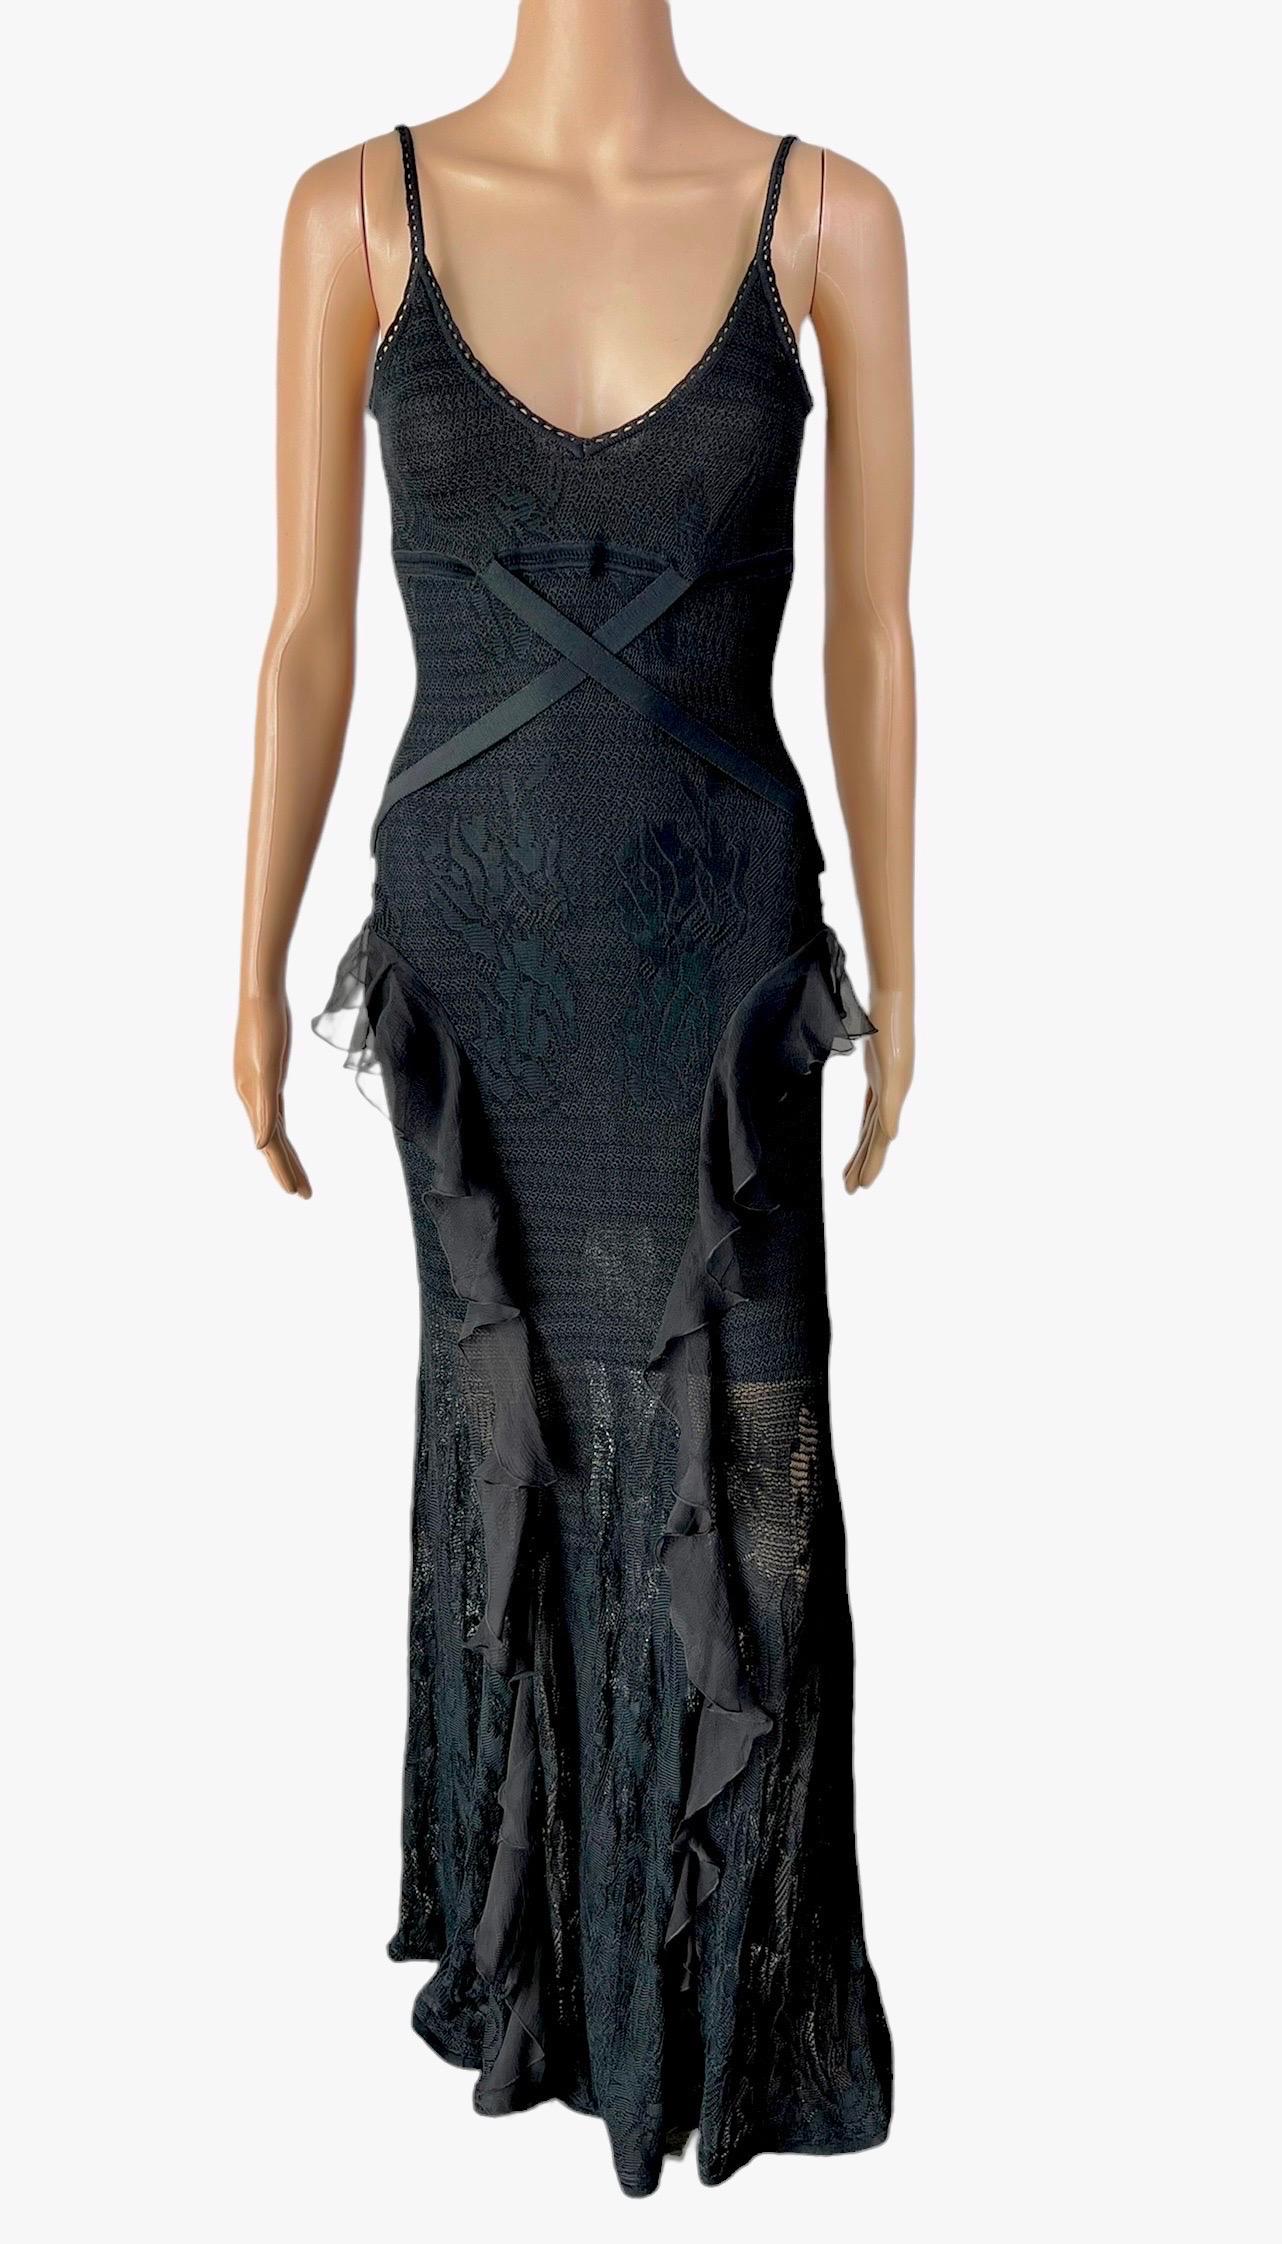 Christian Dior by John Galliano S/S2003 Sheer Lace Knit Black Evening Dress Gown For Sale 2